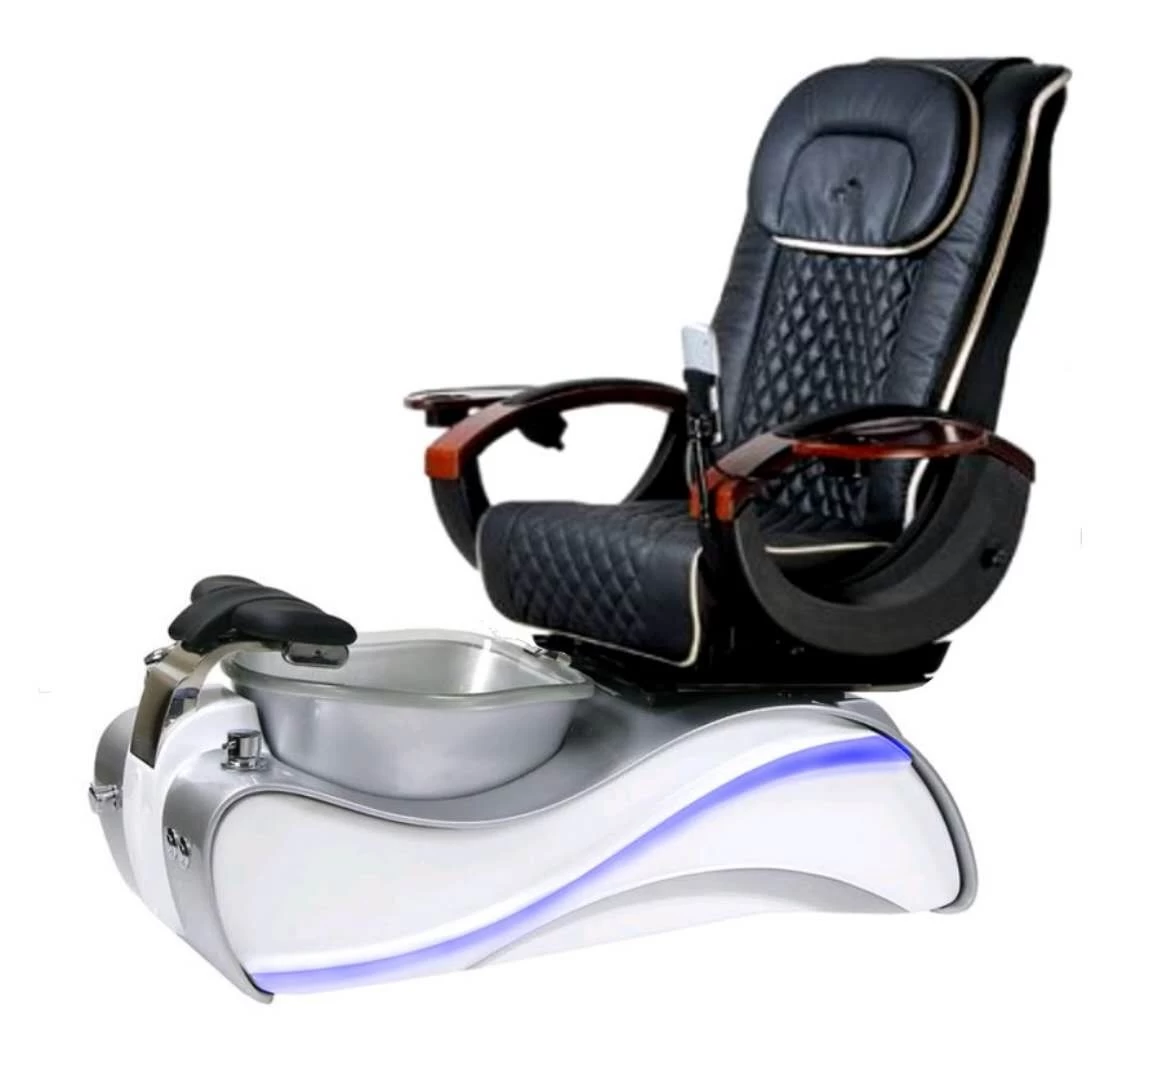 1. Type: Pedicure Chair 2.Brand: Doshower 3. Model number: DS-W2 4.Style: Spa pedicure chair 5. Sanitary Source: Hot & Cold Water Assembly 6. Massage Function: kneading Massage 7.Spa Base: fiberglass with steel frame 8. Certification: CE / UL 9. Color: optional